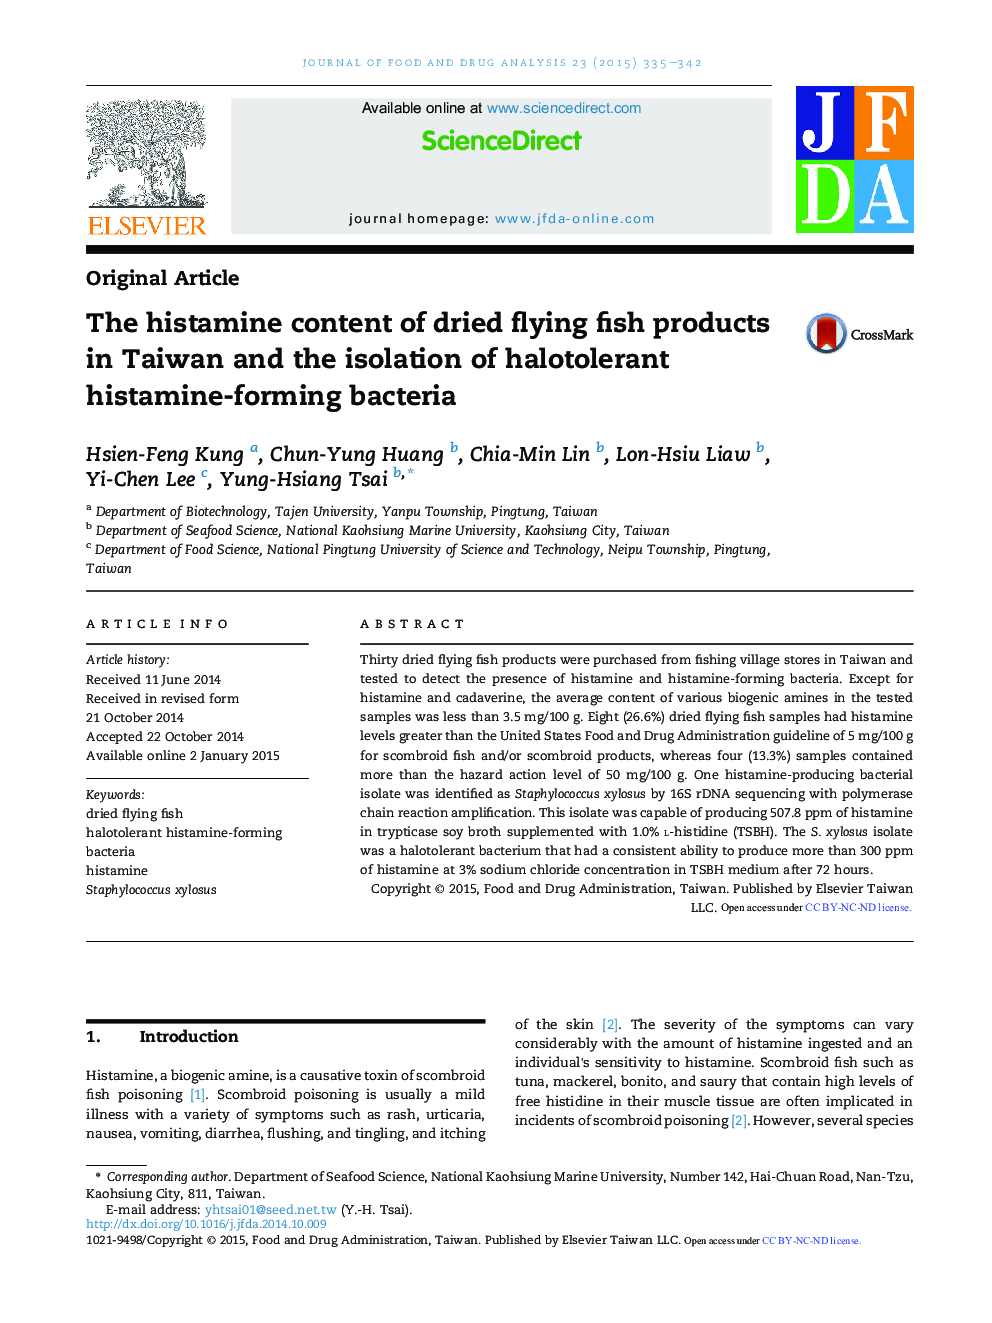 The histamine content of dried flying fish products in Taiwan and the isolation of halotolerant histamine-forming bacteria